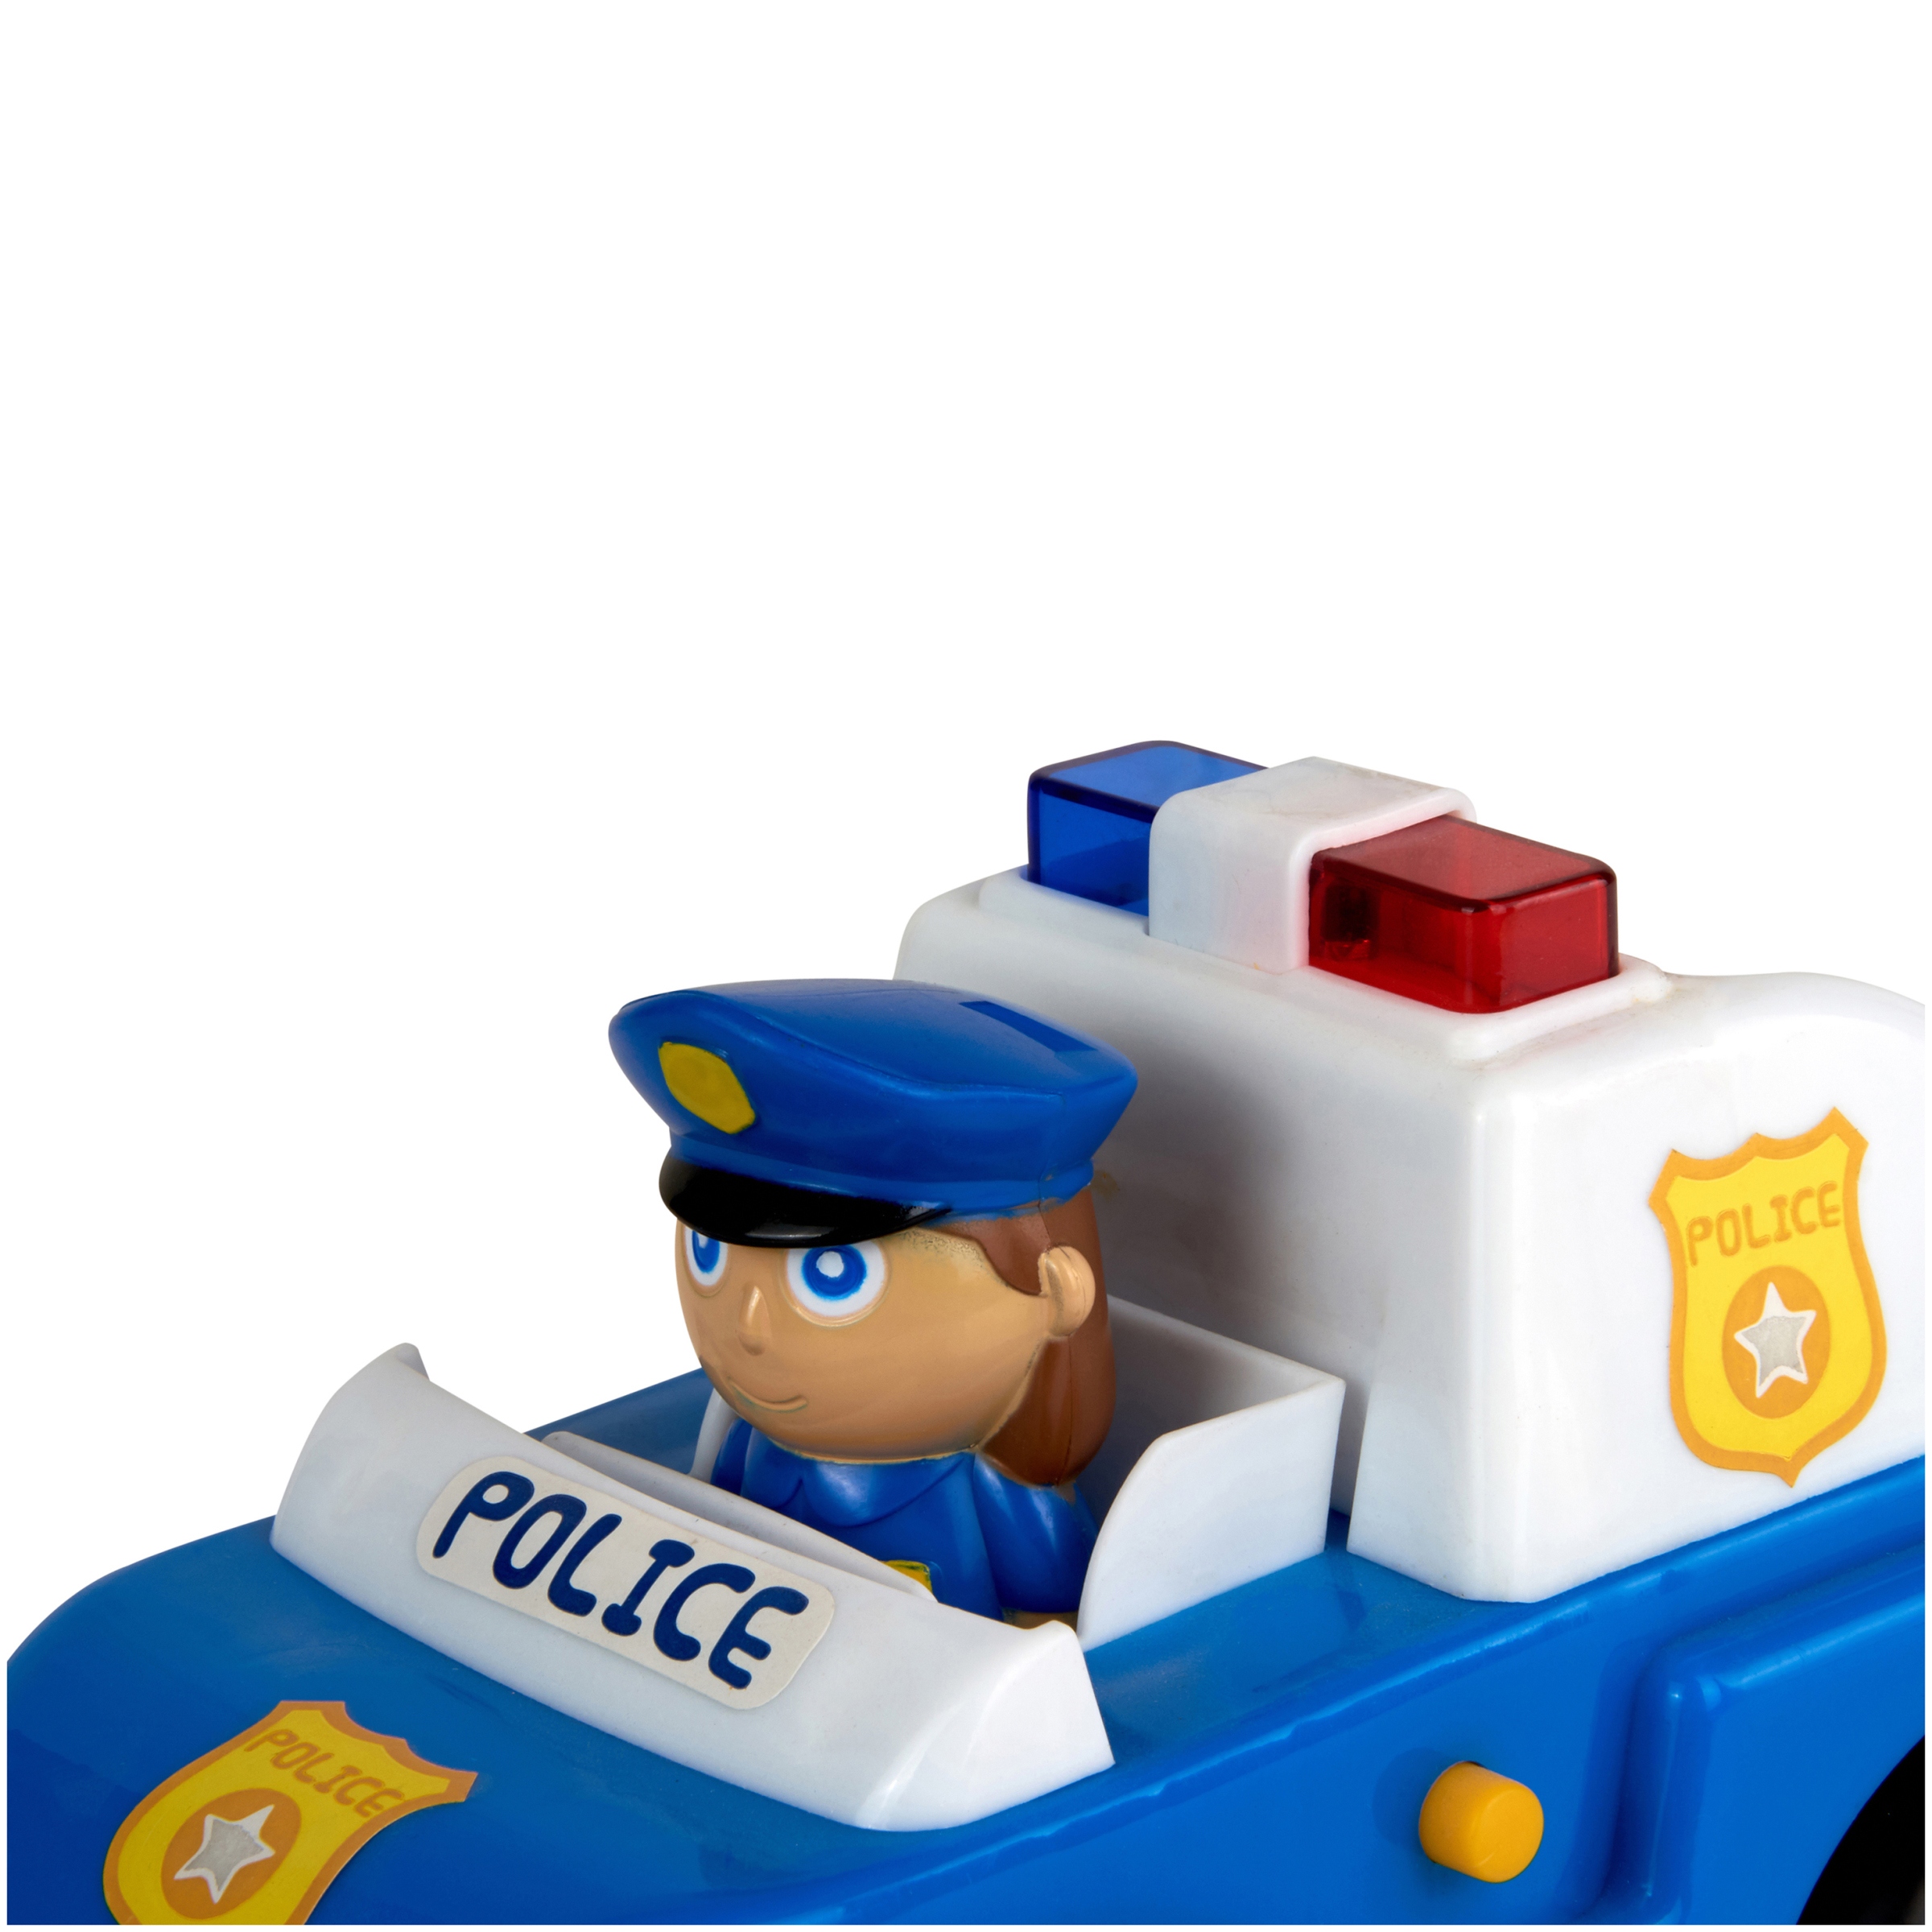 Kid Connection My First Vehicle Toy Car with Action Figure Police Vehicle Playset (2 Pieces) - image 3 of 4